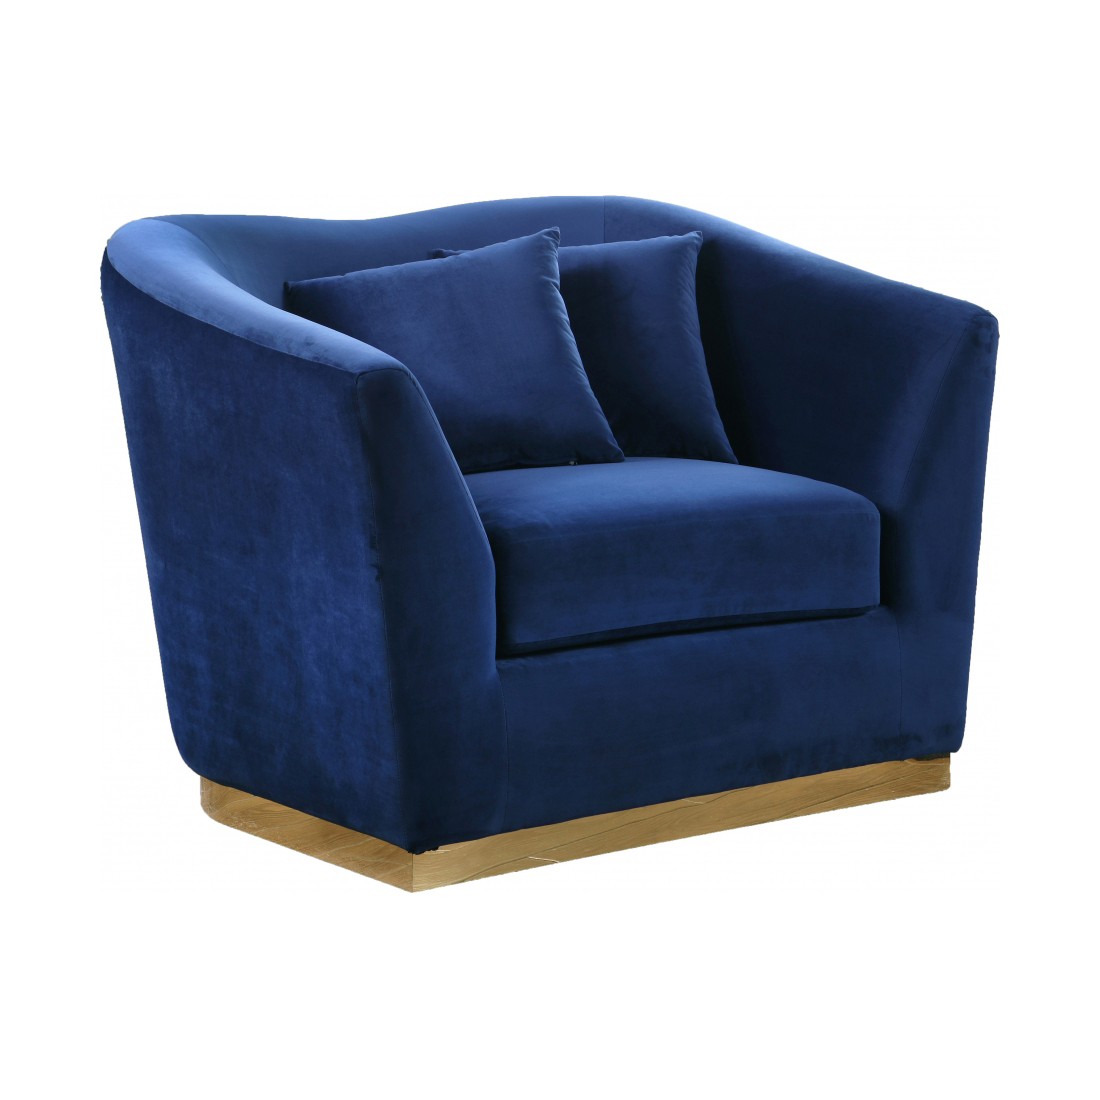 Bella Lounge Chair (Navy) | Event Trade Show Furniture Rental | FormDecor